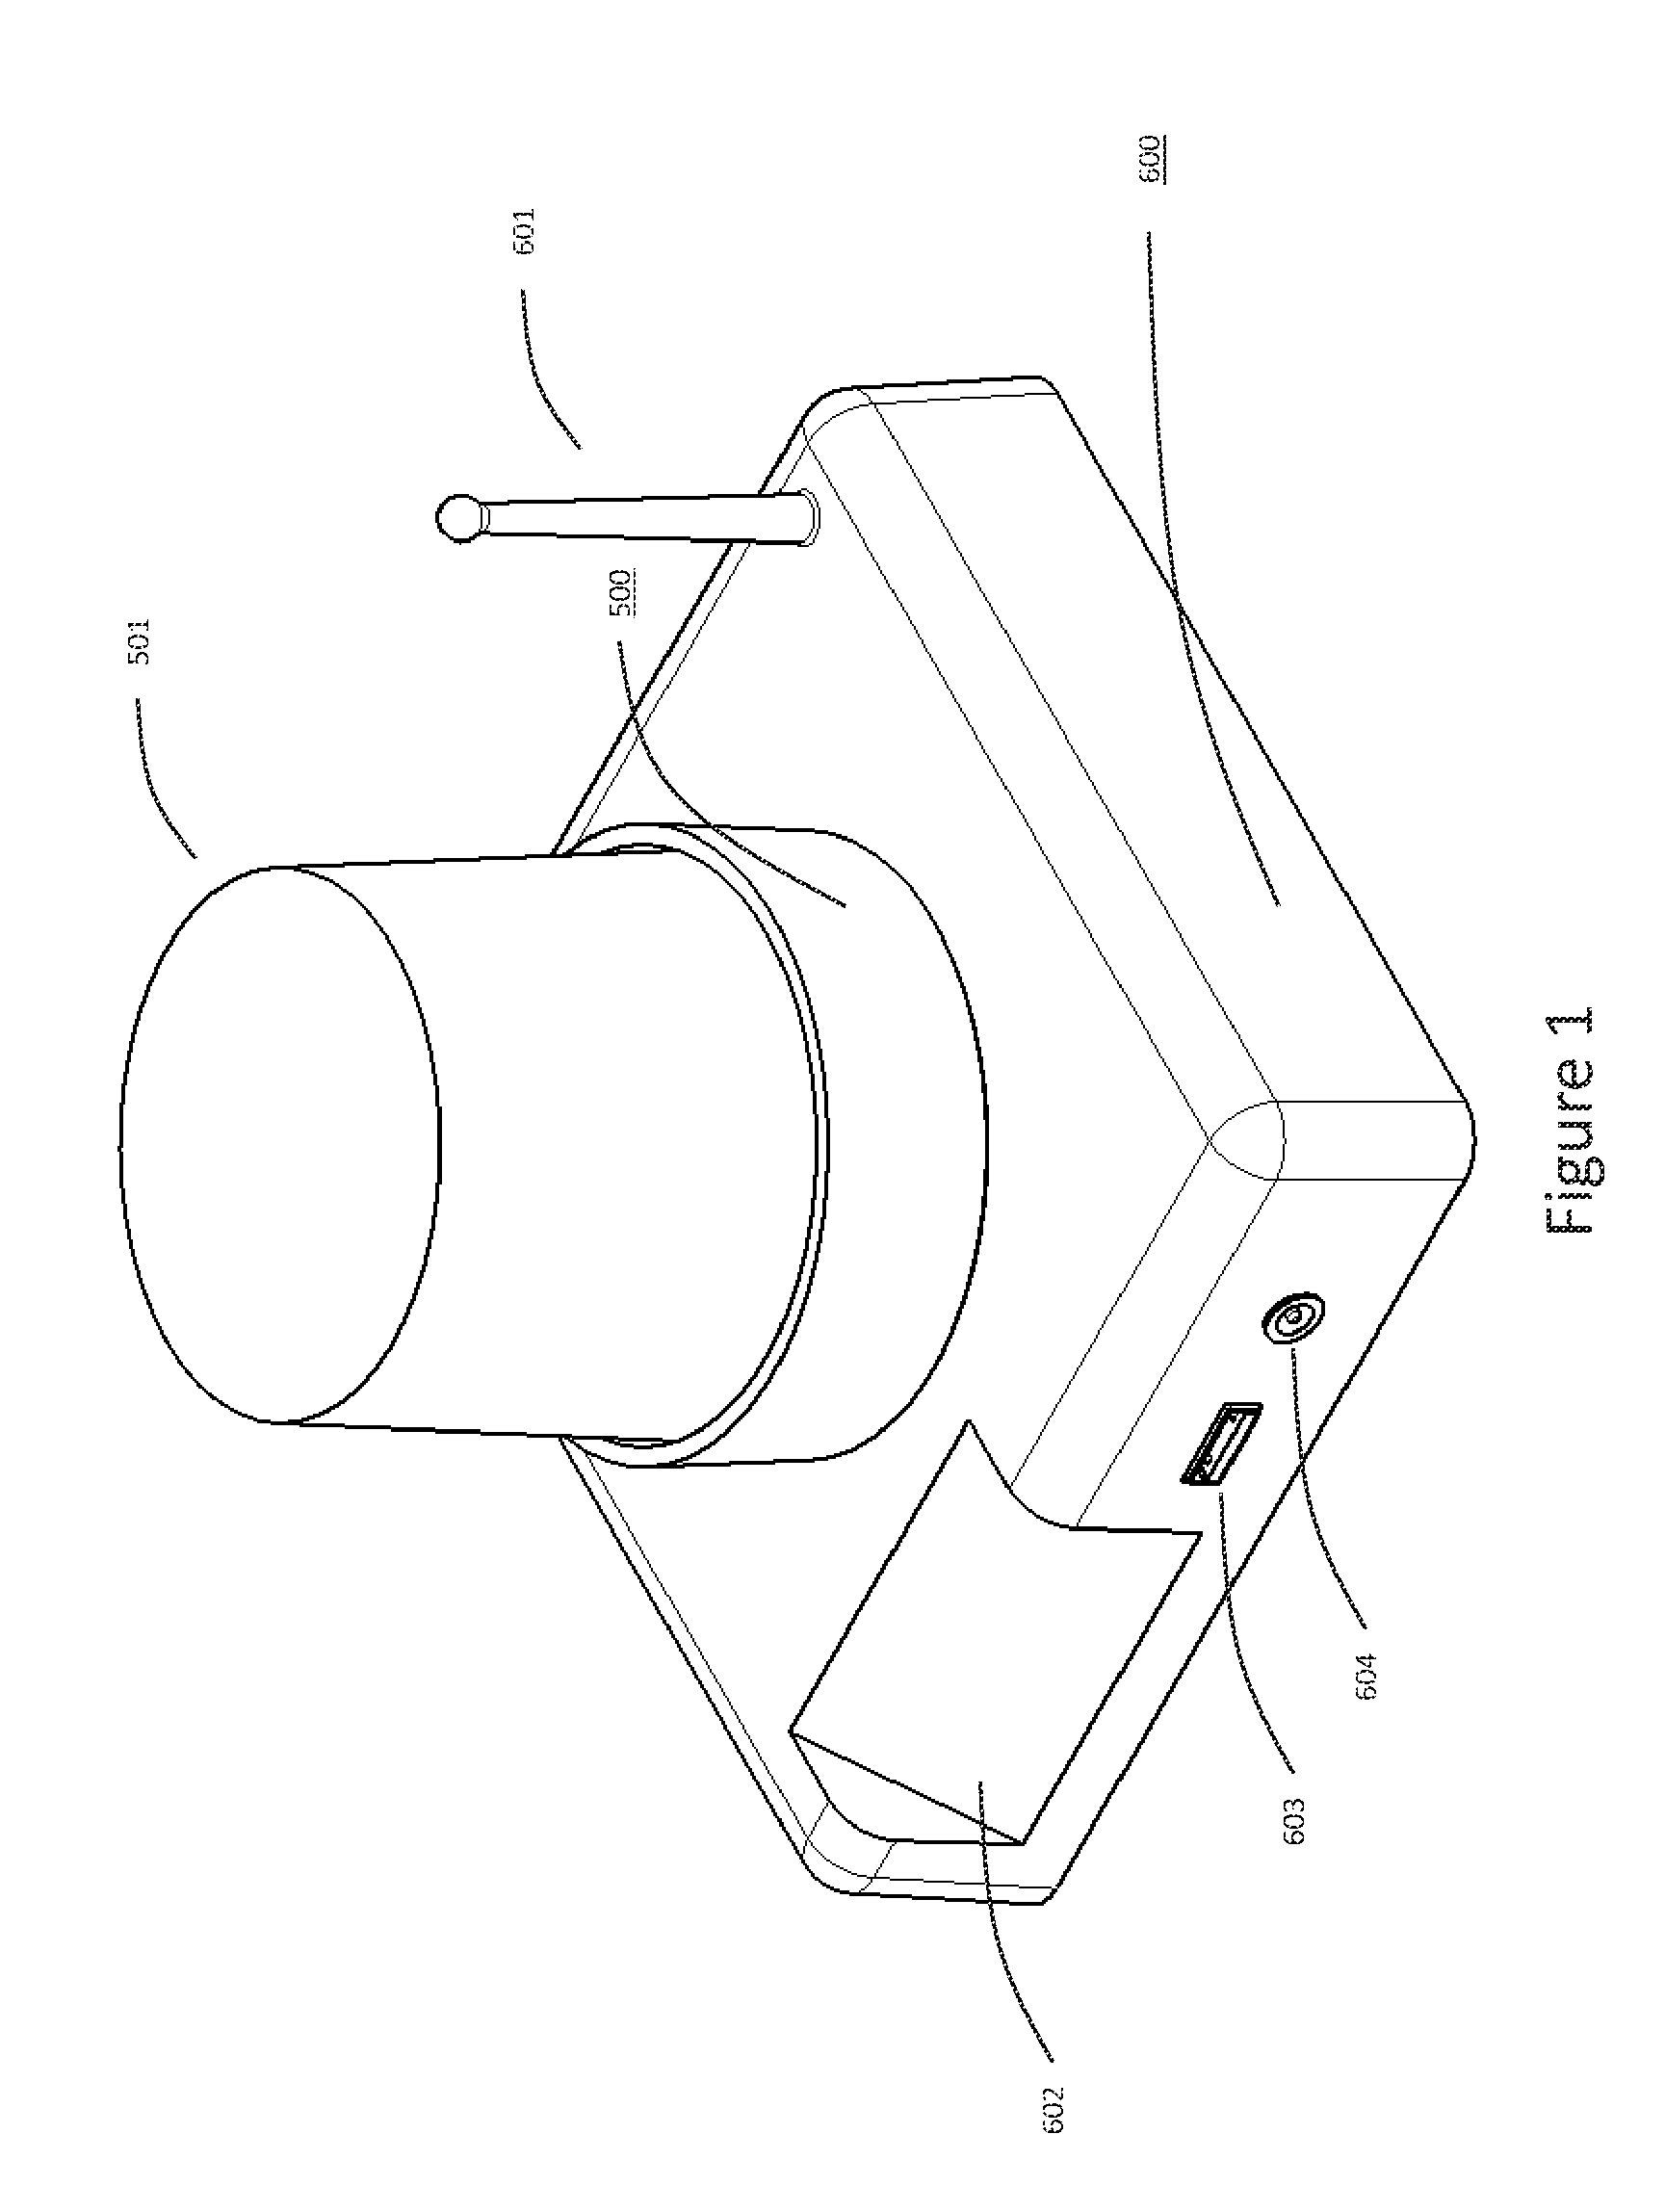 Method and apparatus for forming of an automated sampling device for the detection of <i>salmonella enterica </i>utilizing an electrochemical aptamer biosensor